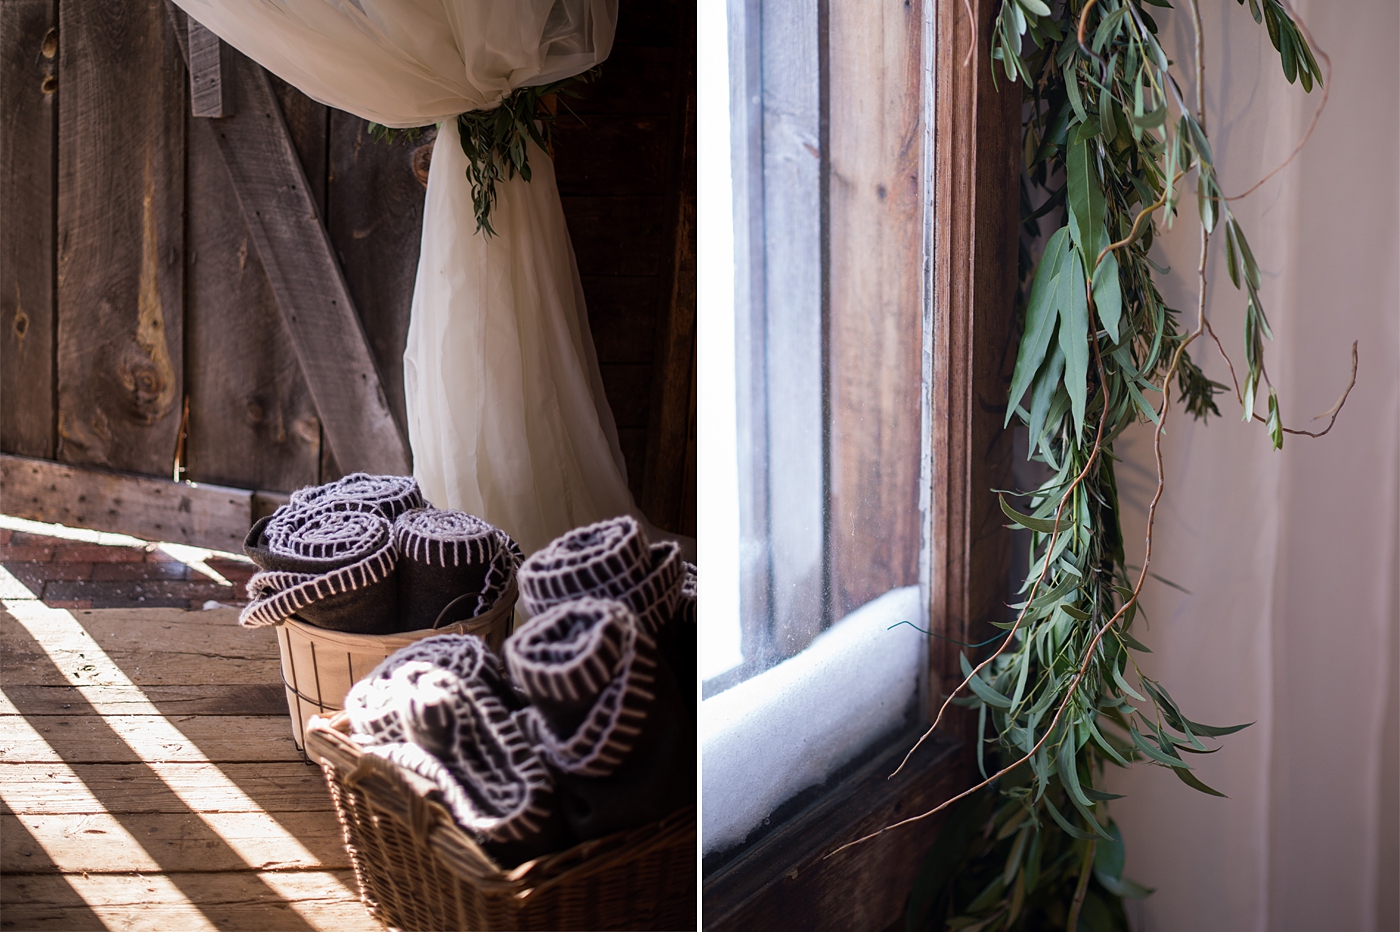 new hampshire wedding at chocure preserve photographed by brea mcdonald photography